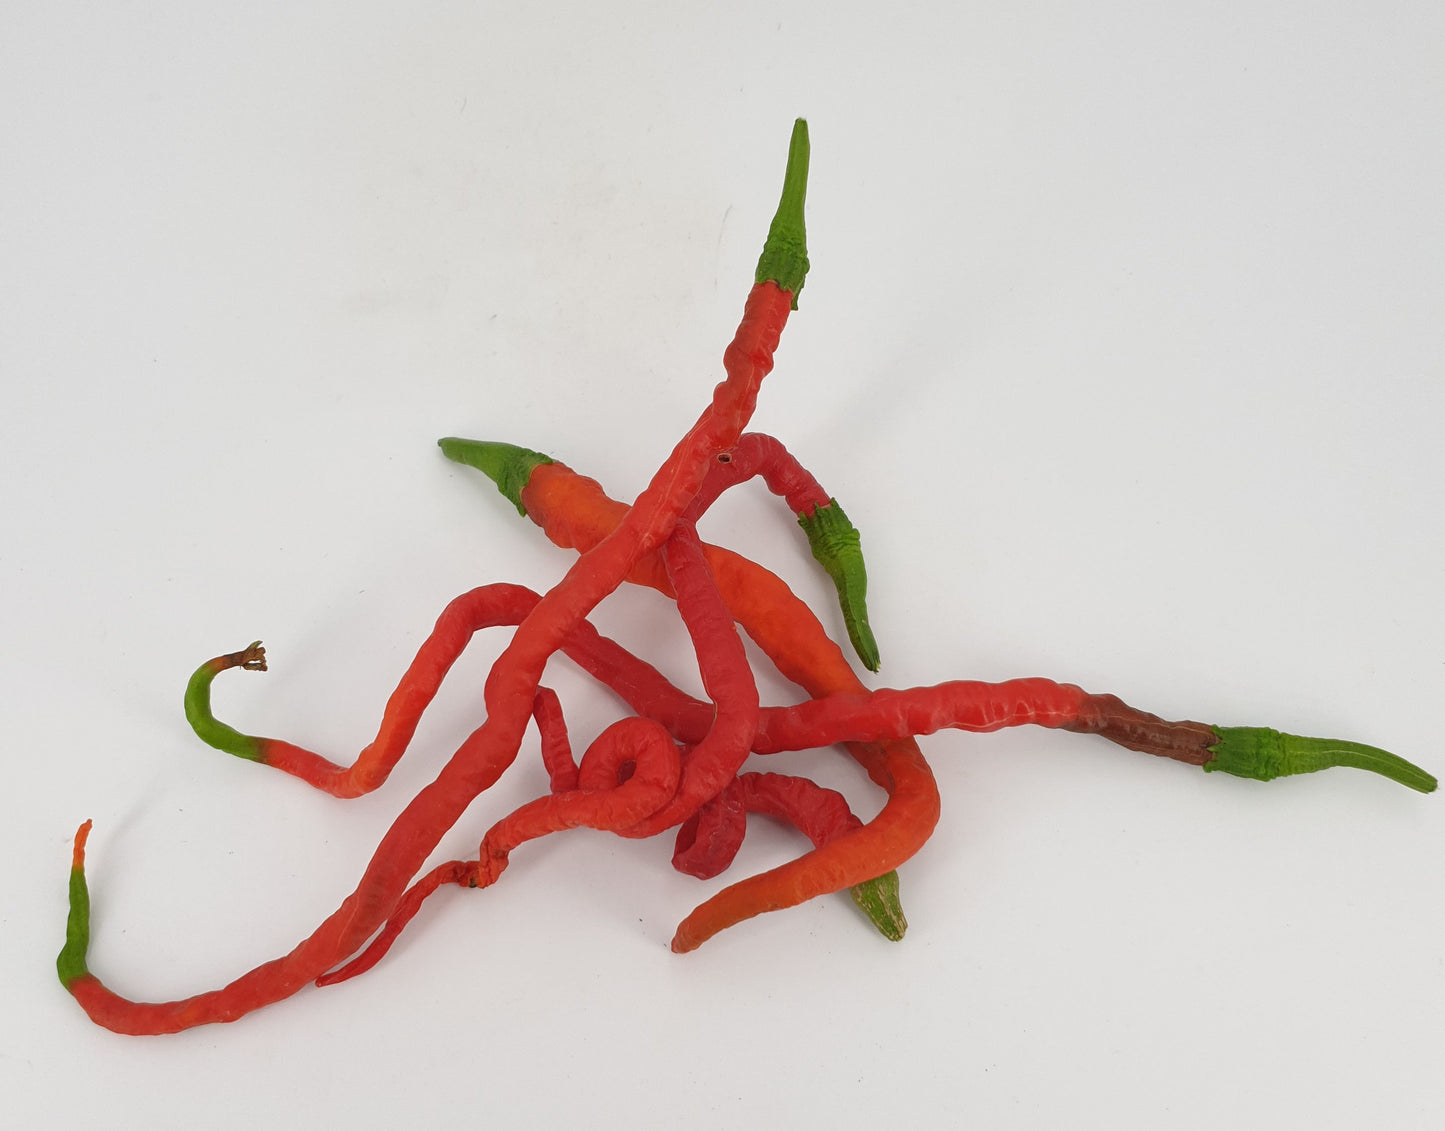 Slim and spicy: long chilis (5 varieties with 5 seeds each)